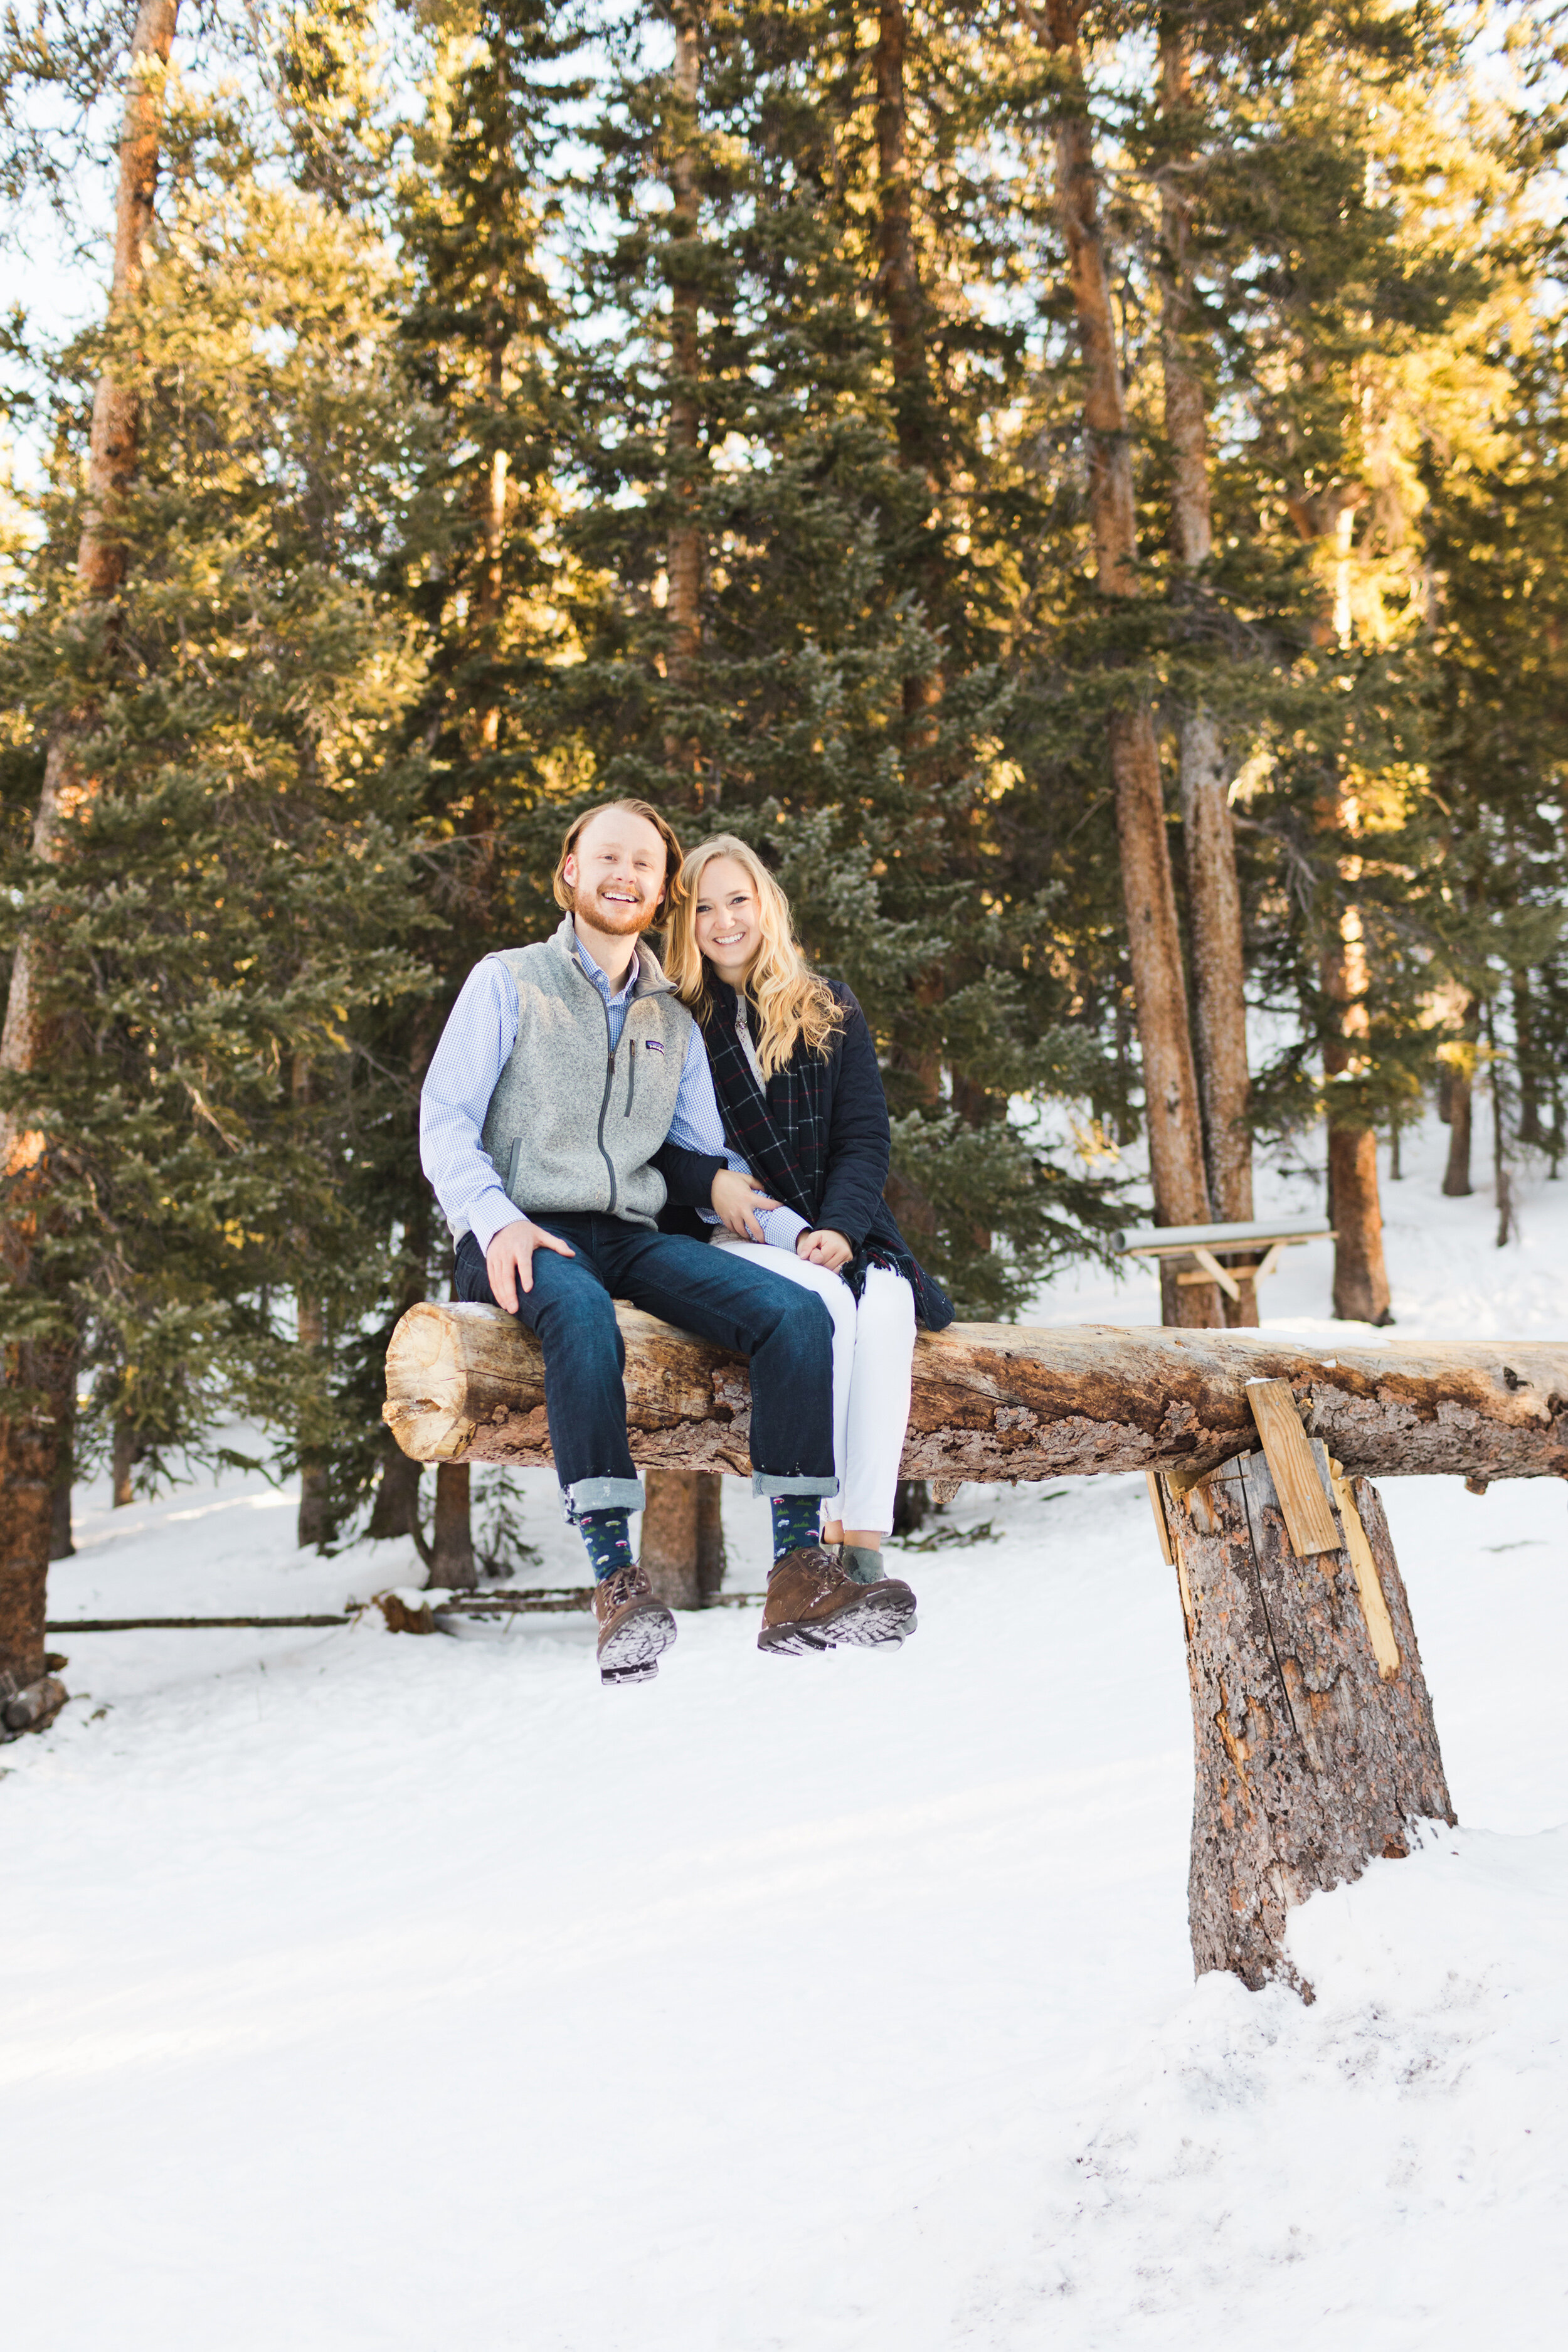 snowy-colorado-engagement-photos-in-the-forest-by-jackie-cooper-photo-11.jpg